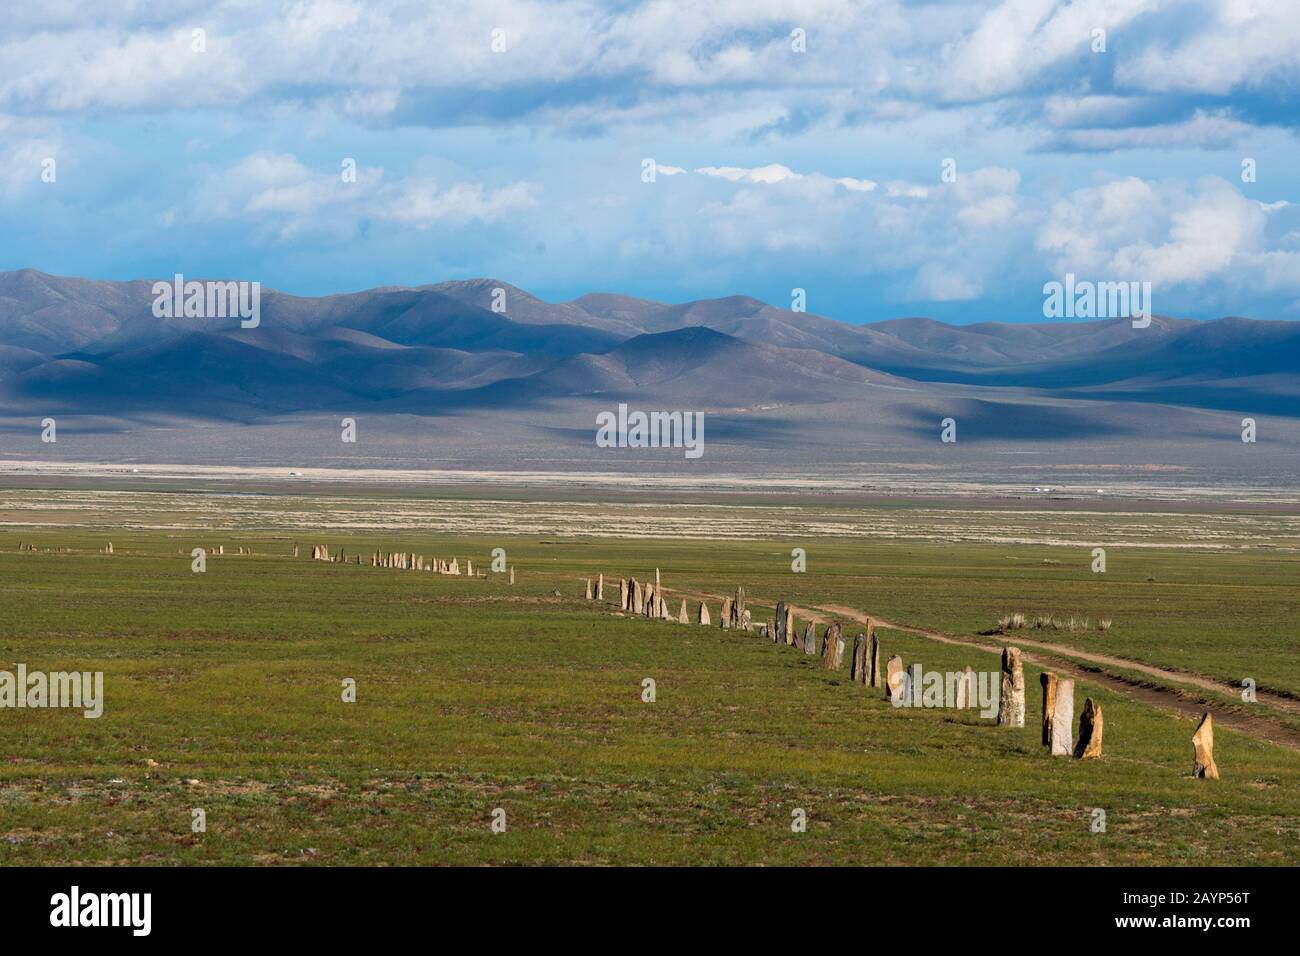 The Ungut complex, a Turkik monument ensemble consisting of man stones and numerous tombs from the 6-8th centuries AD, in Hustain Nuruu National Park, Stock Photo